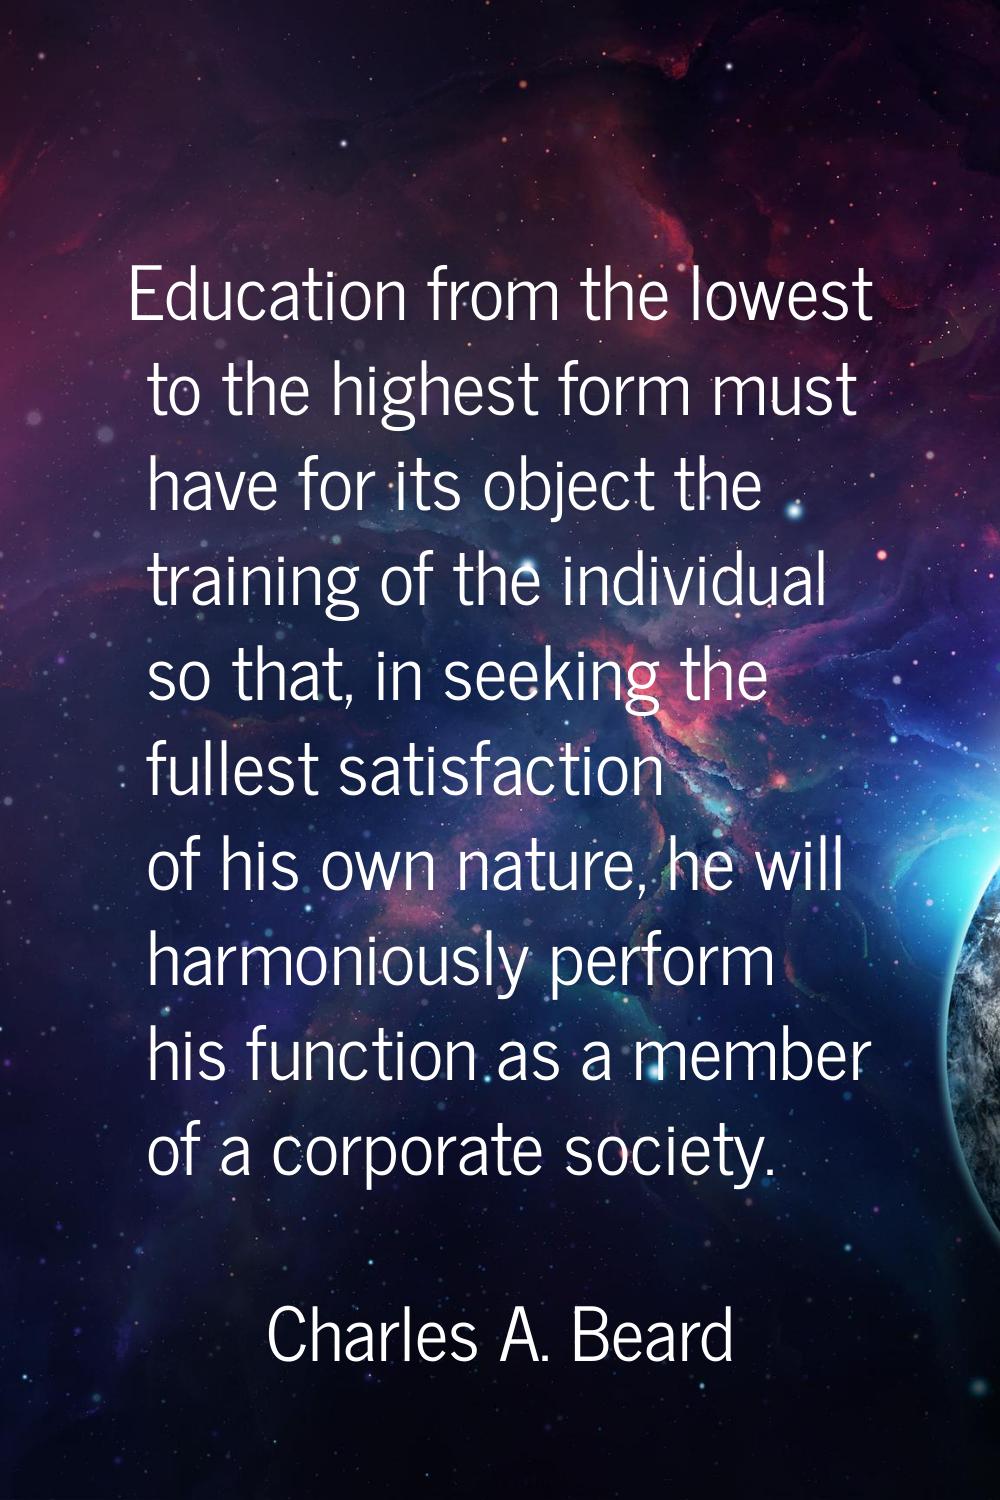 Education from the lowest to the highest form must have for its object the training of the individu